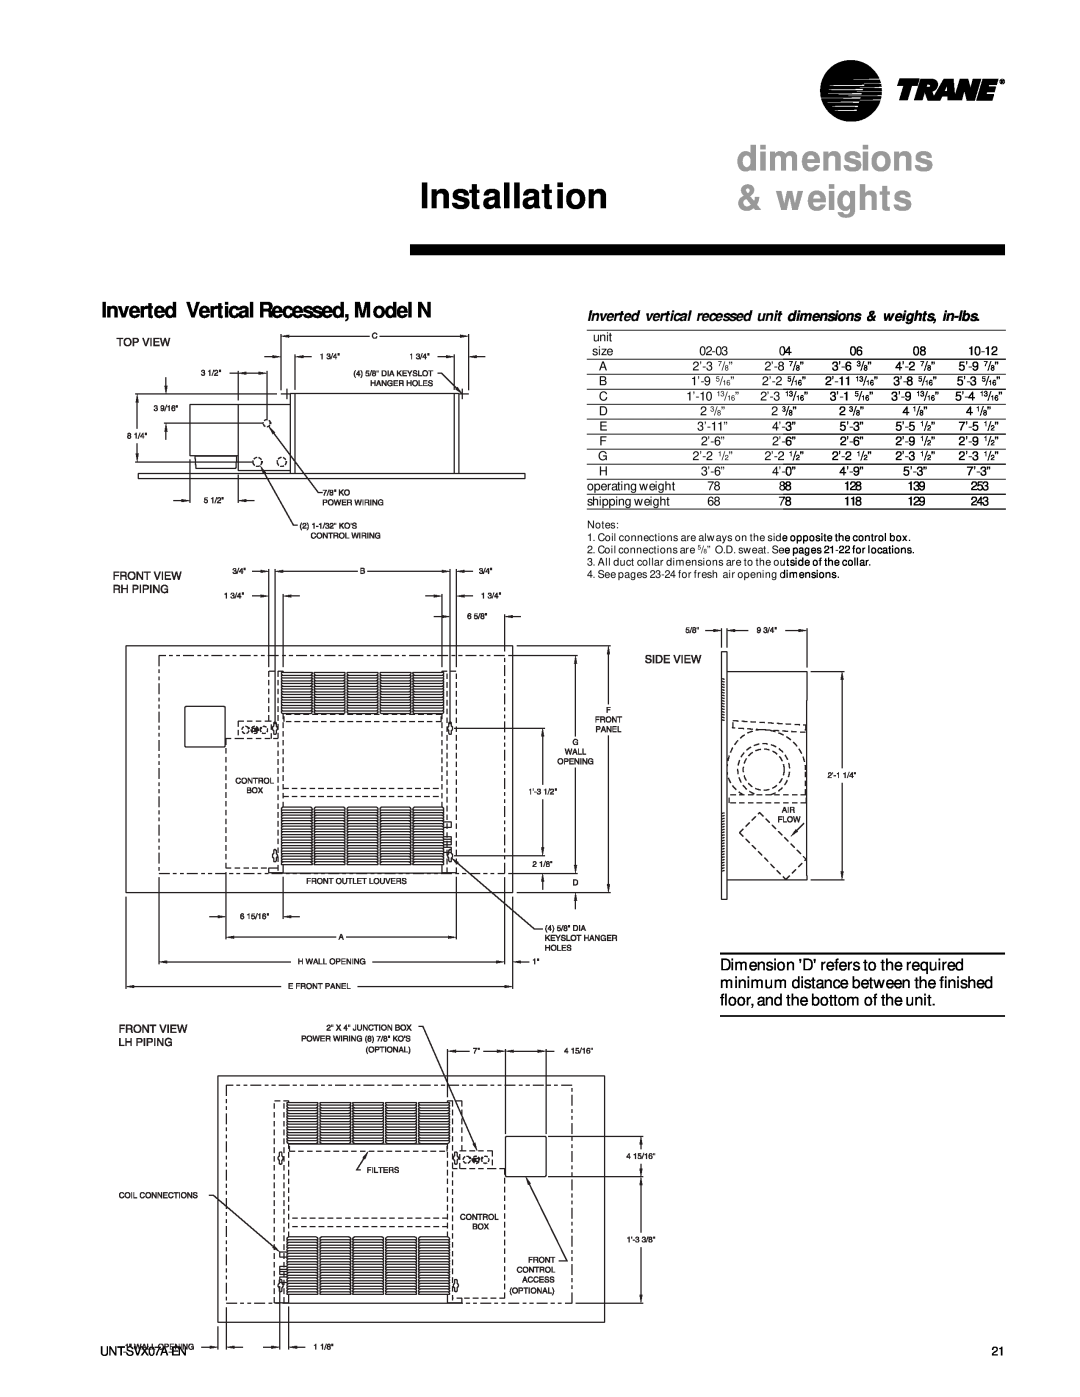 Trane UniTrane Fan-Coil & Force Flo Air Conditioners manual Inverted Vertical Recessed, Model N, Installation, dimensions 